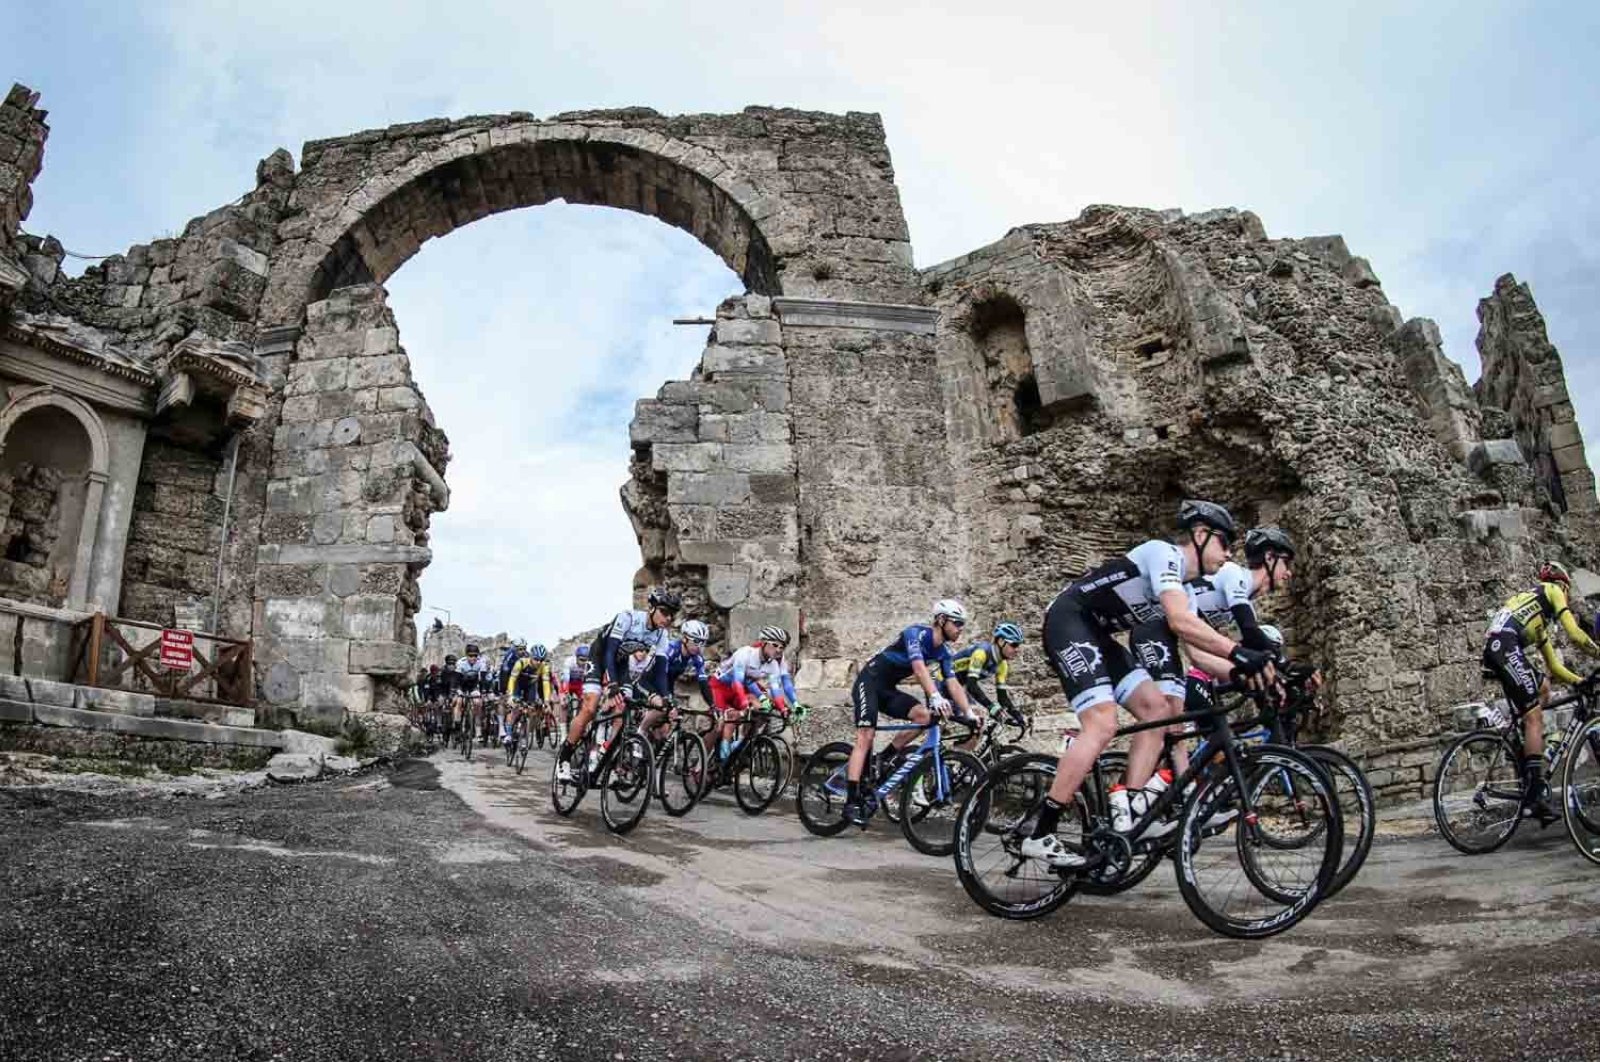 Türkiye’s Tour of Antalya to roll in with global cyclists, scenic marvels